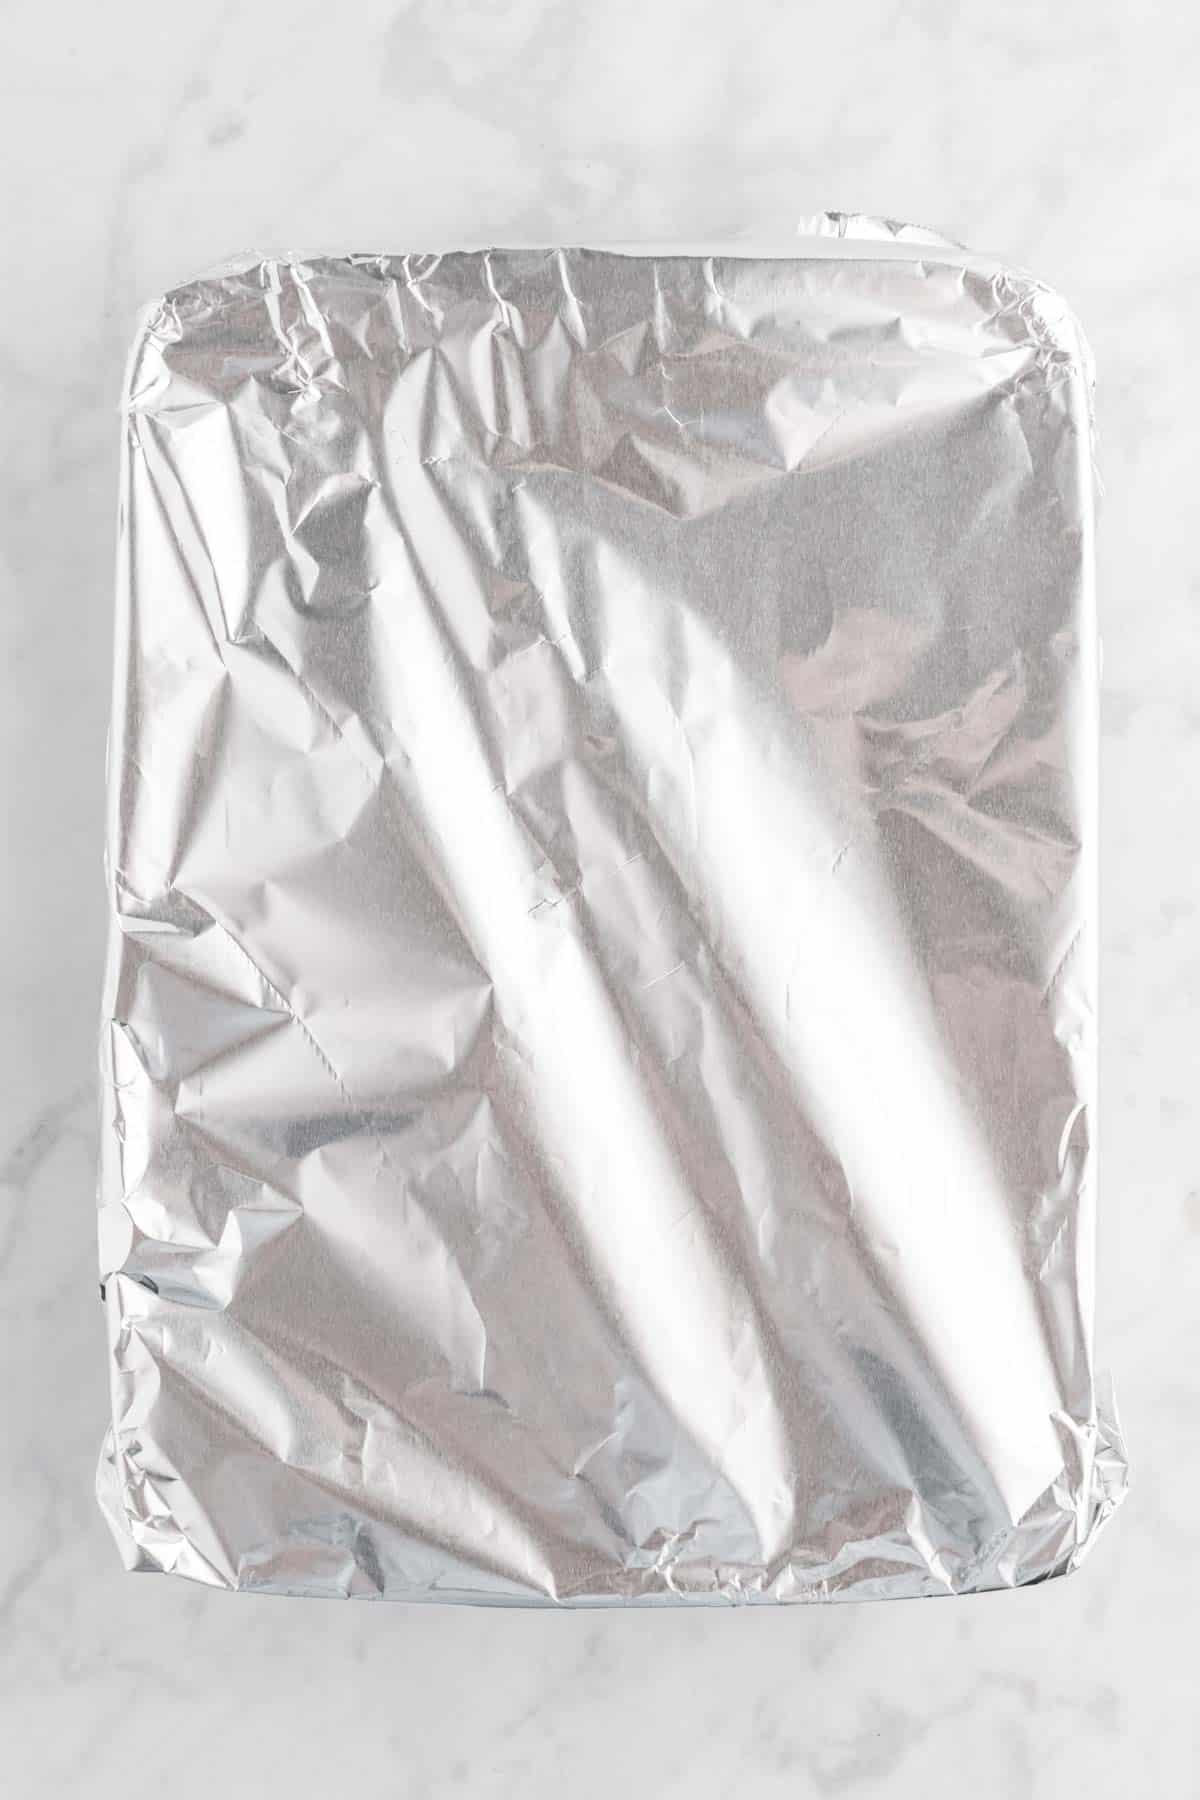 foil covered baking dish